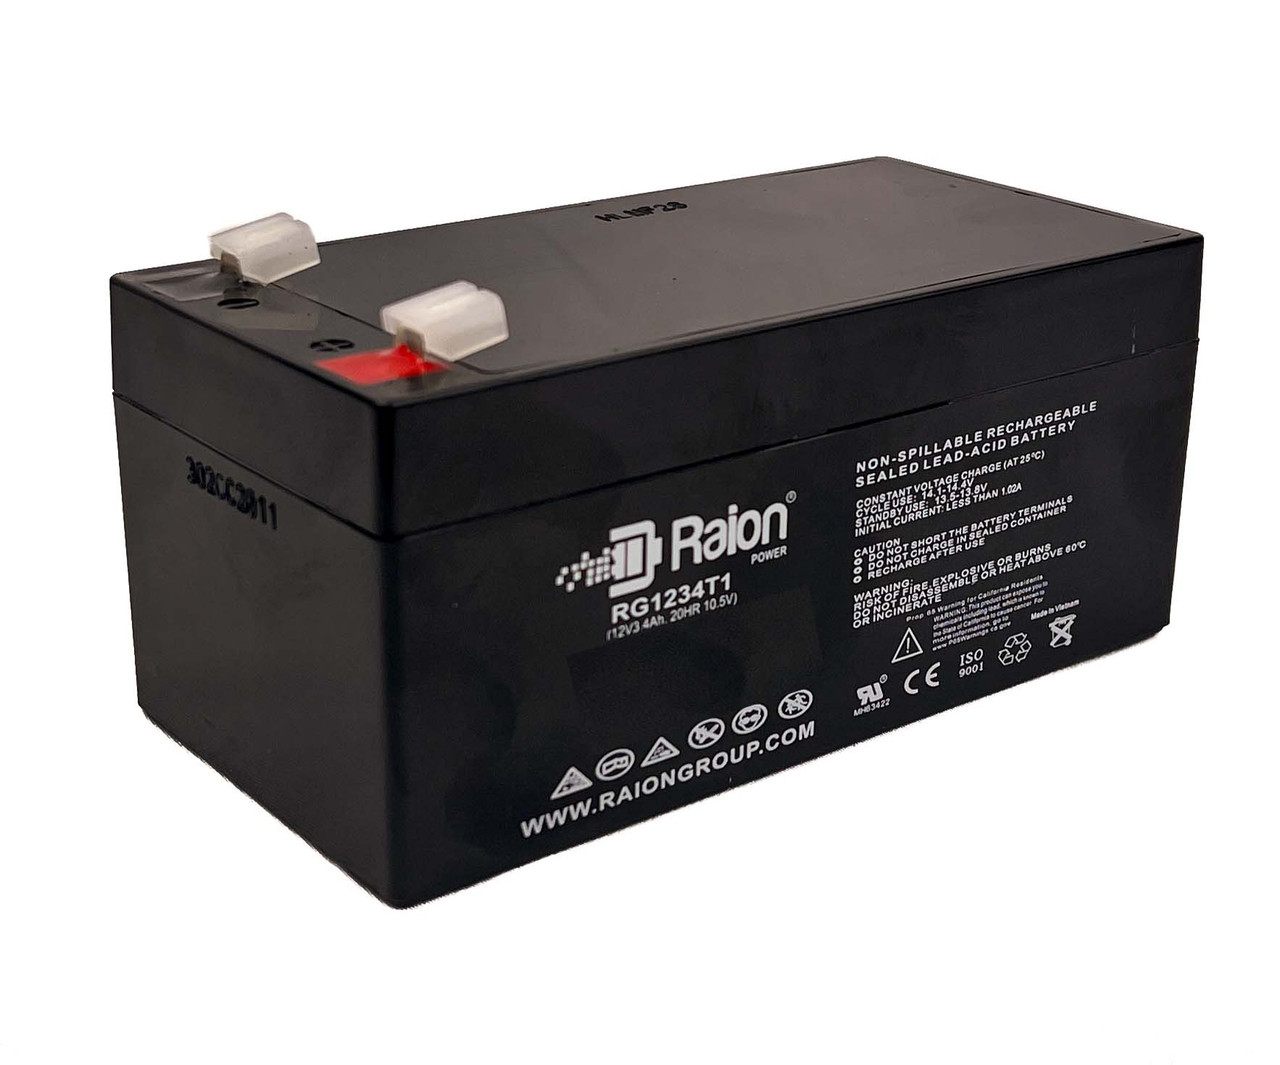 Raion Power 12V 3.4Ah Non-Spillable Replacement Battery for Universal Power UP3.2-12